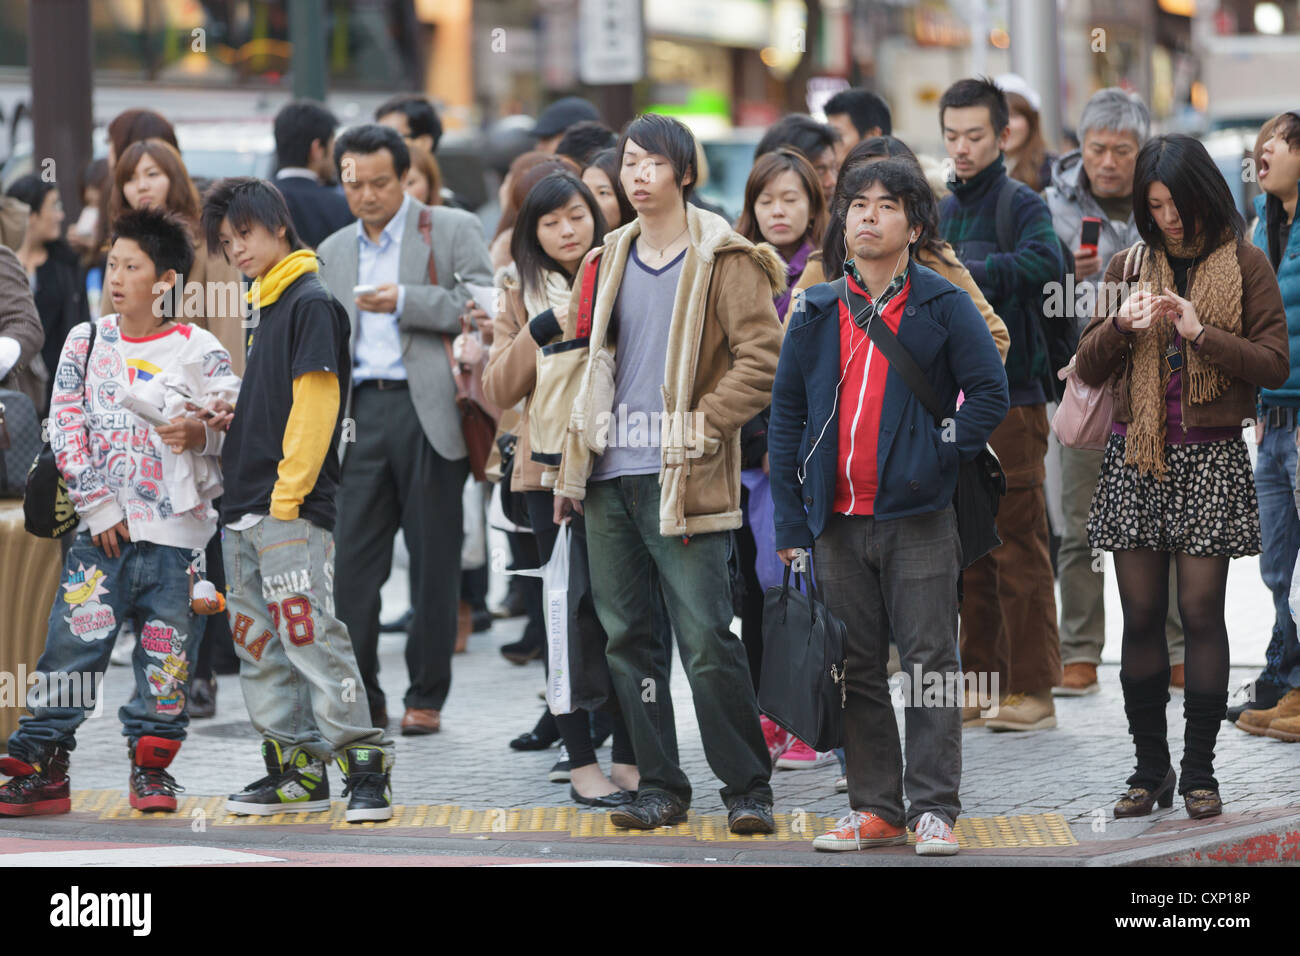 Japanese people waiting for crossing at hachiko crossroad in Shibuya district, Tokyo, Japan Stock Photo